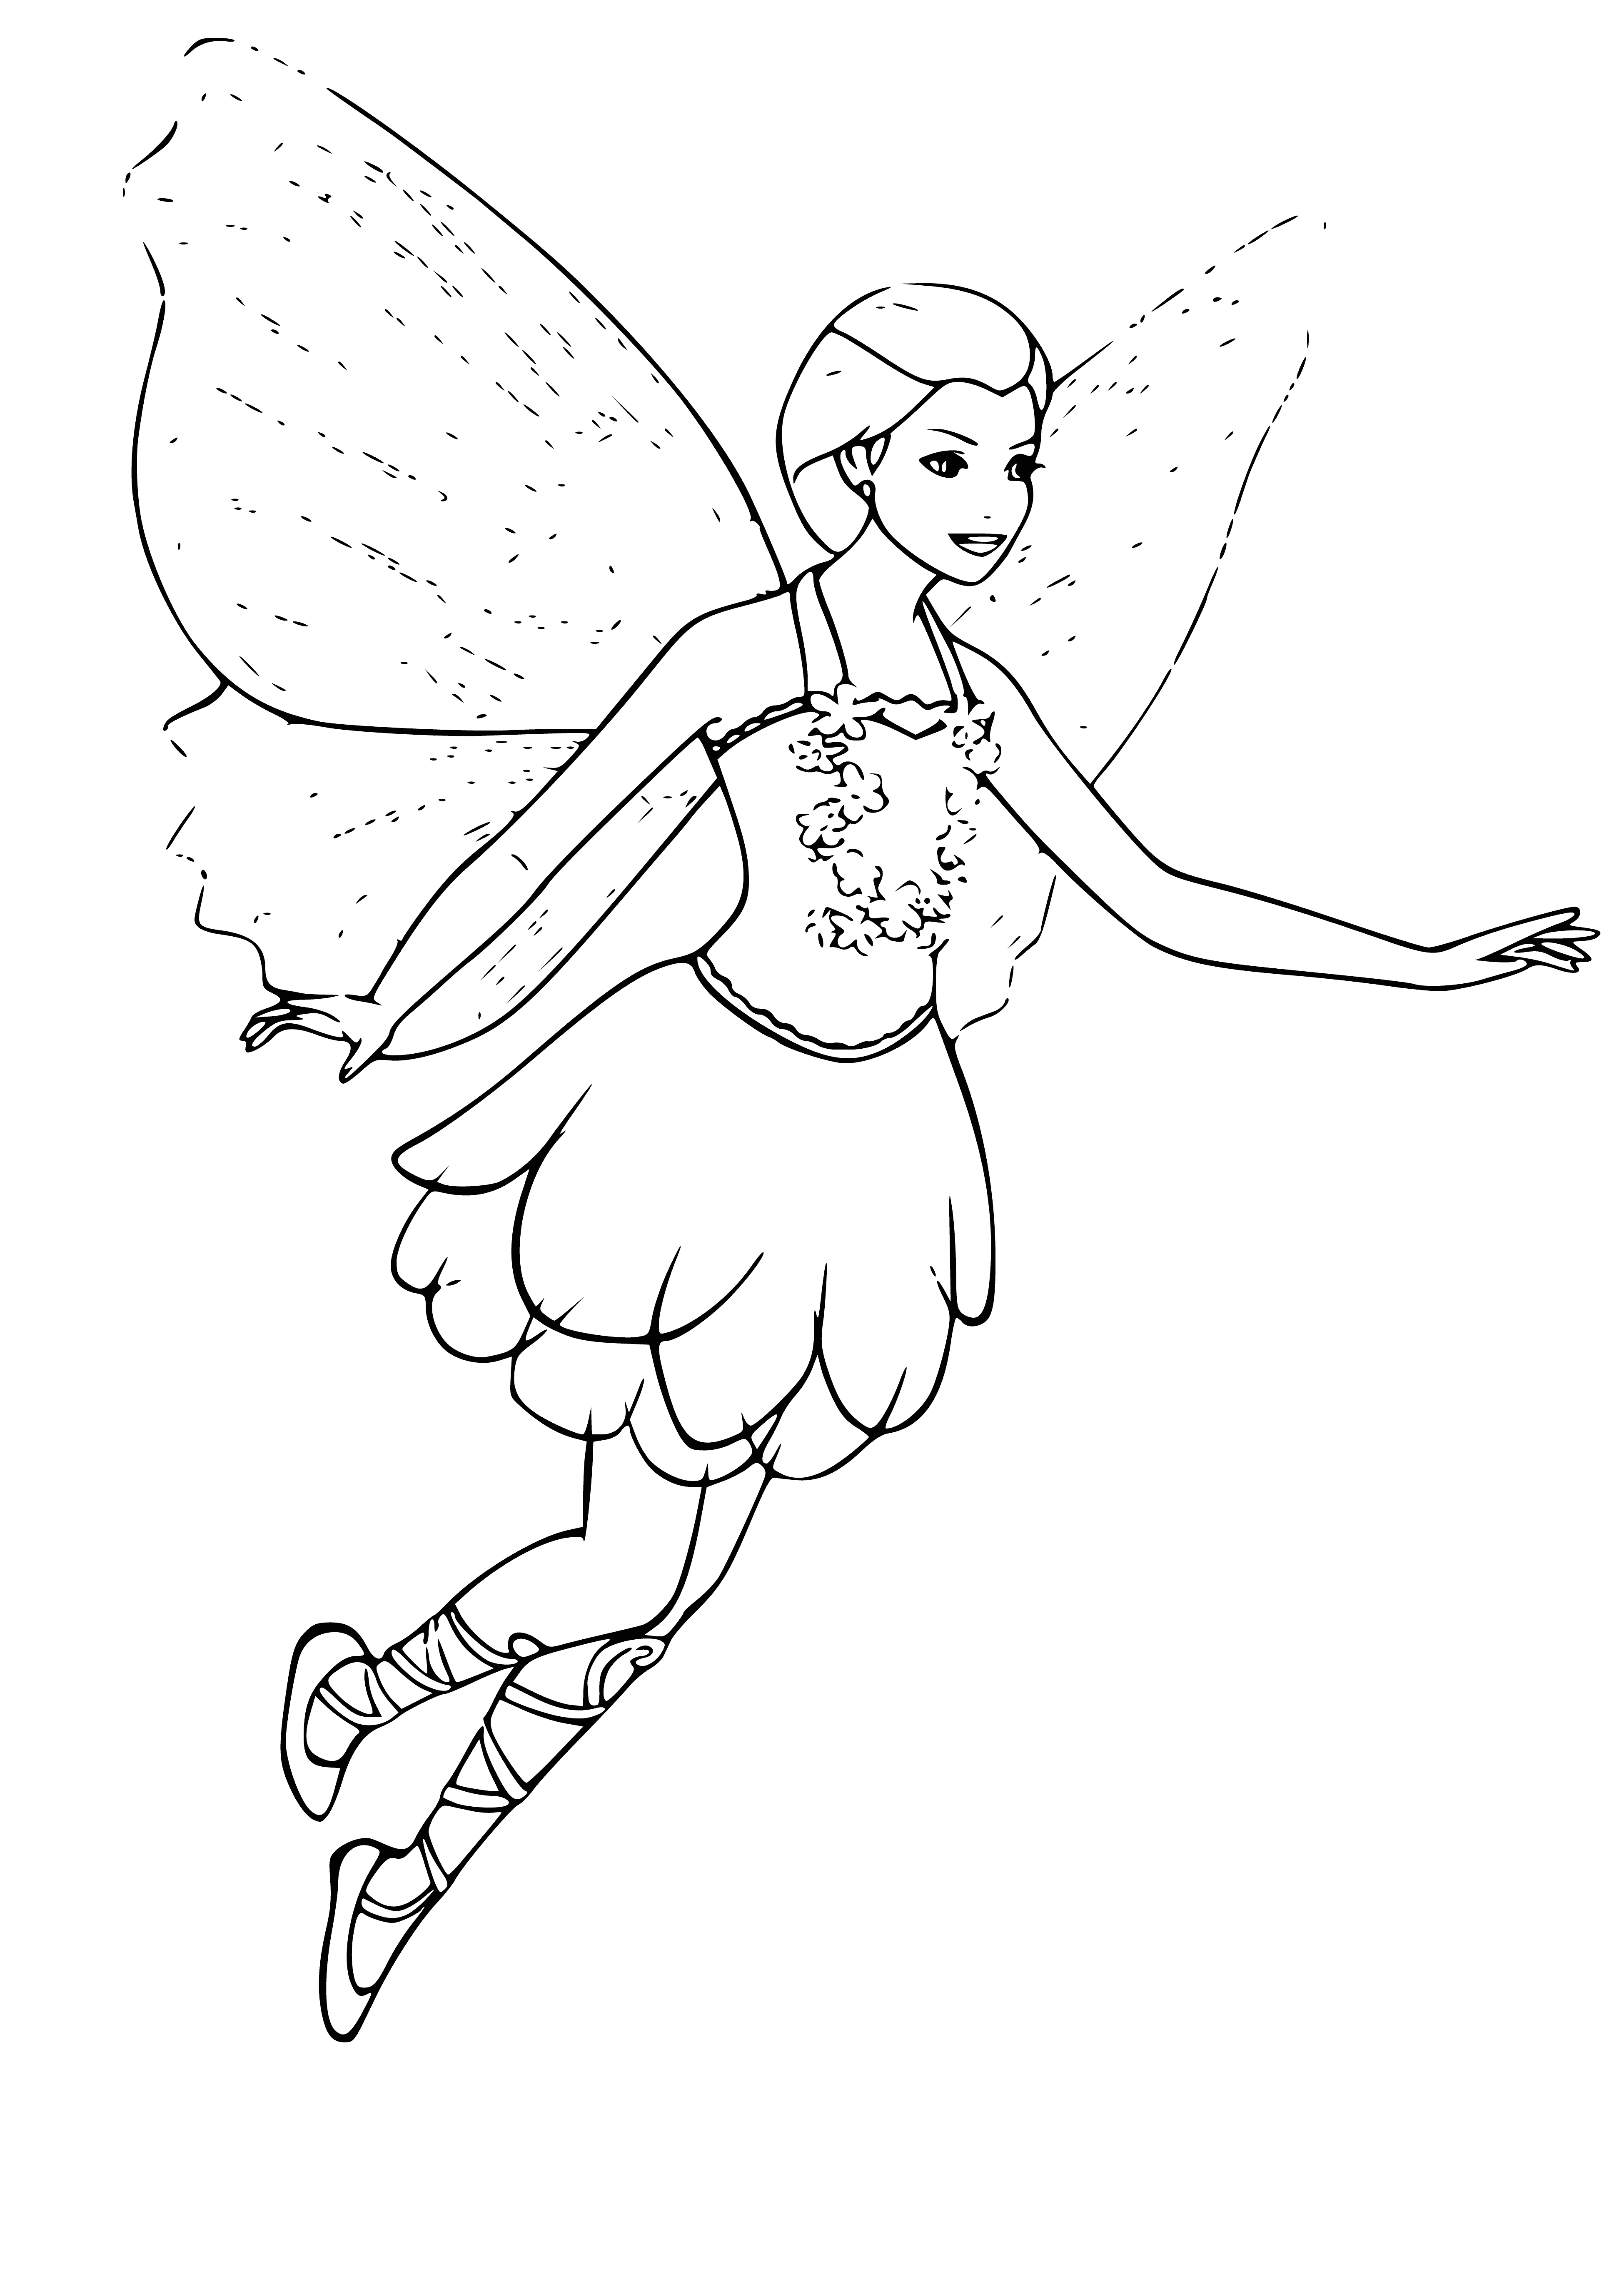 coloring page: Barbie Fairy Butterfly figurine has blonde hair, blue eyes, yellow wings w/ black spots & a pink dress.